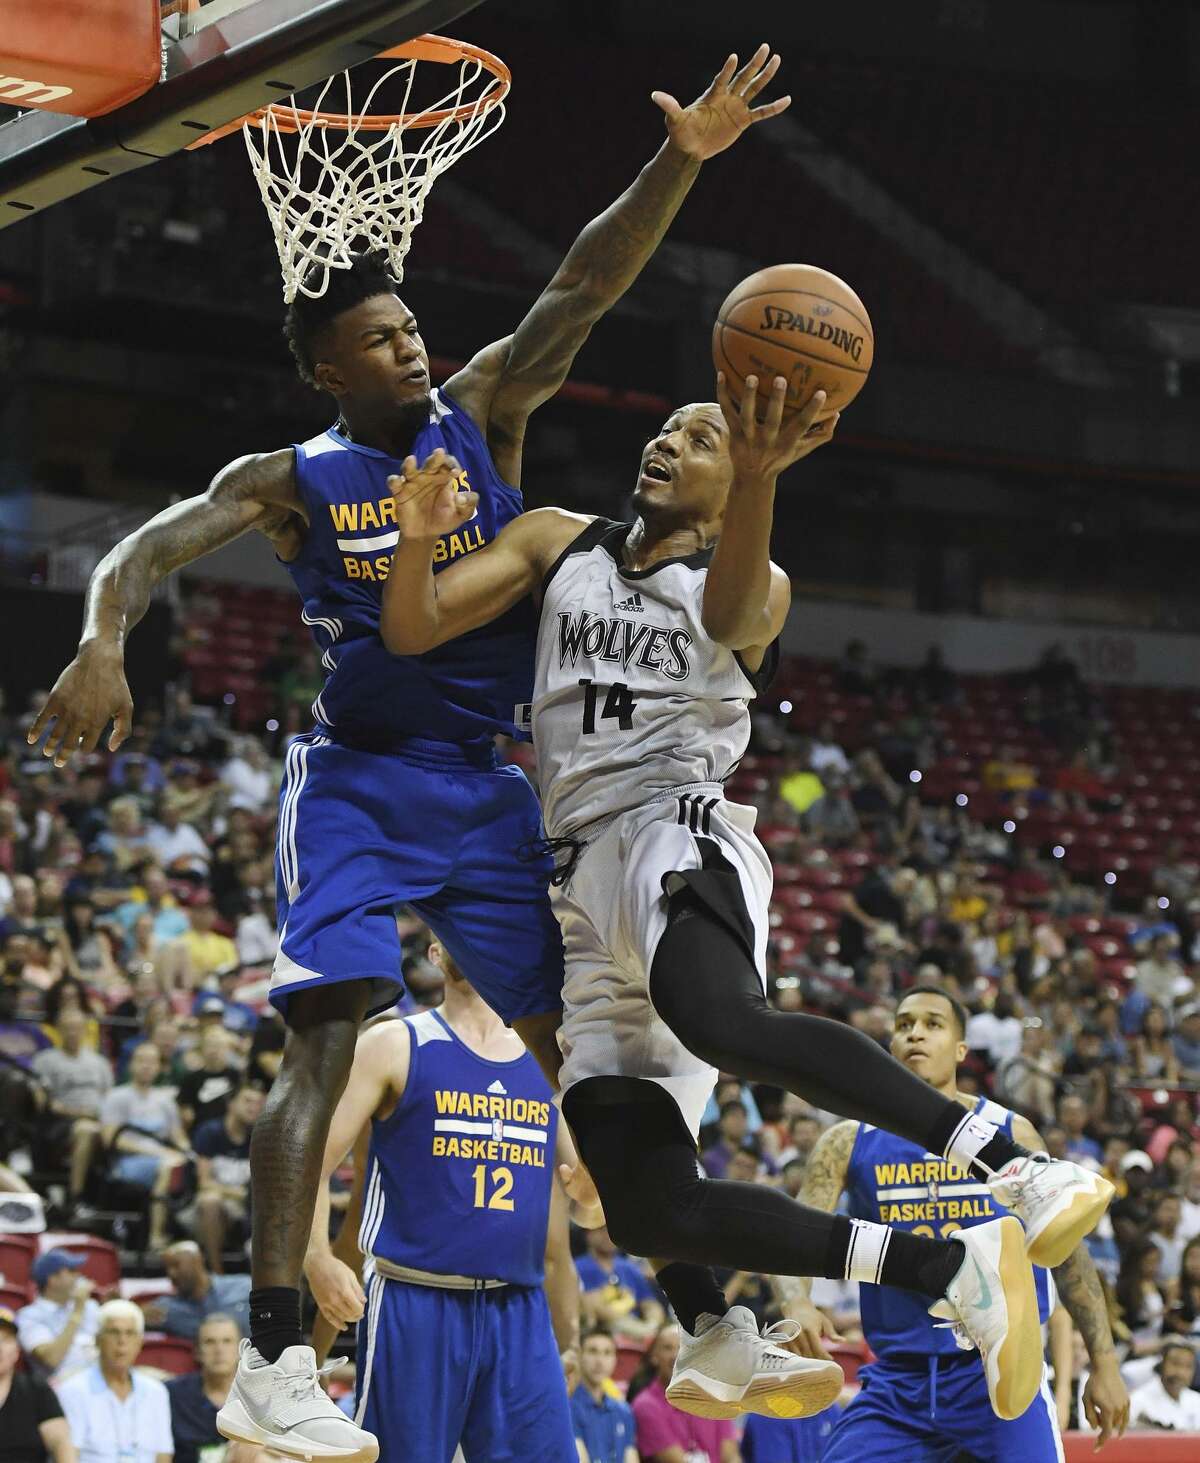 Above: LAS VEGAS, NV - JULY 12: C.J. Williams #14 of the Minnesota Timberwolves drives to the basket against Jordan Bell #2 of the Golden State Warriors during the 2017 Summer League at the Thomas & Mack Center on July 12, 2017 in Las Vegas, Nevada. Golden State won 77-69. NOTE TO USER: User expressly acknowledges and agrees that, by downloading and or using this photograph, User is consenting to the terms and conditions of the Getty Images License Agreement. (Photo by Ethan Miller/Getty Images)